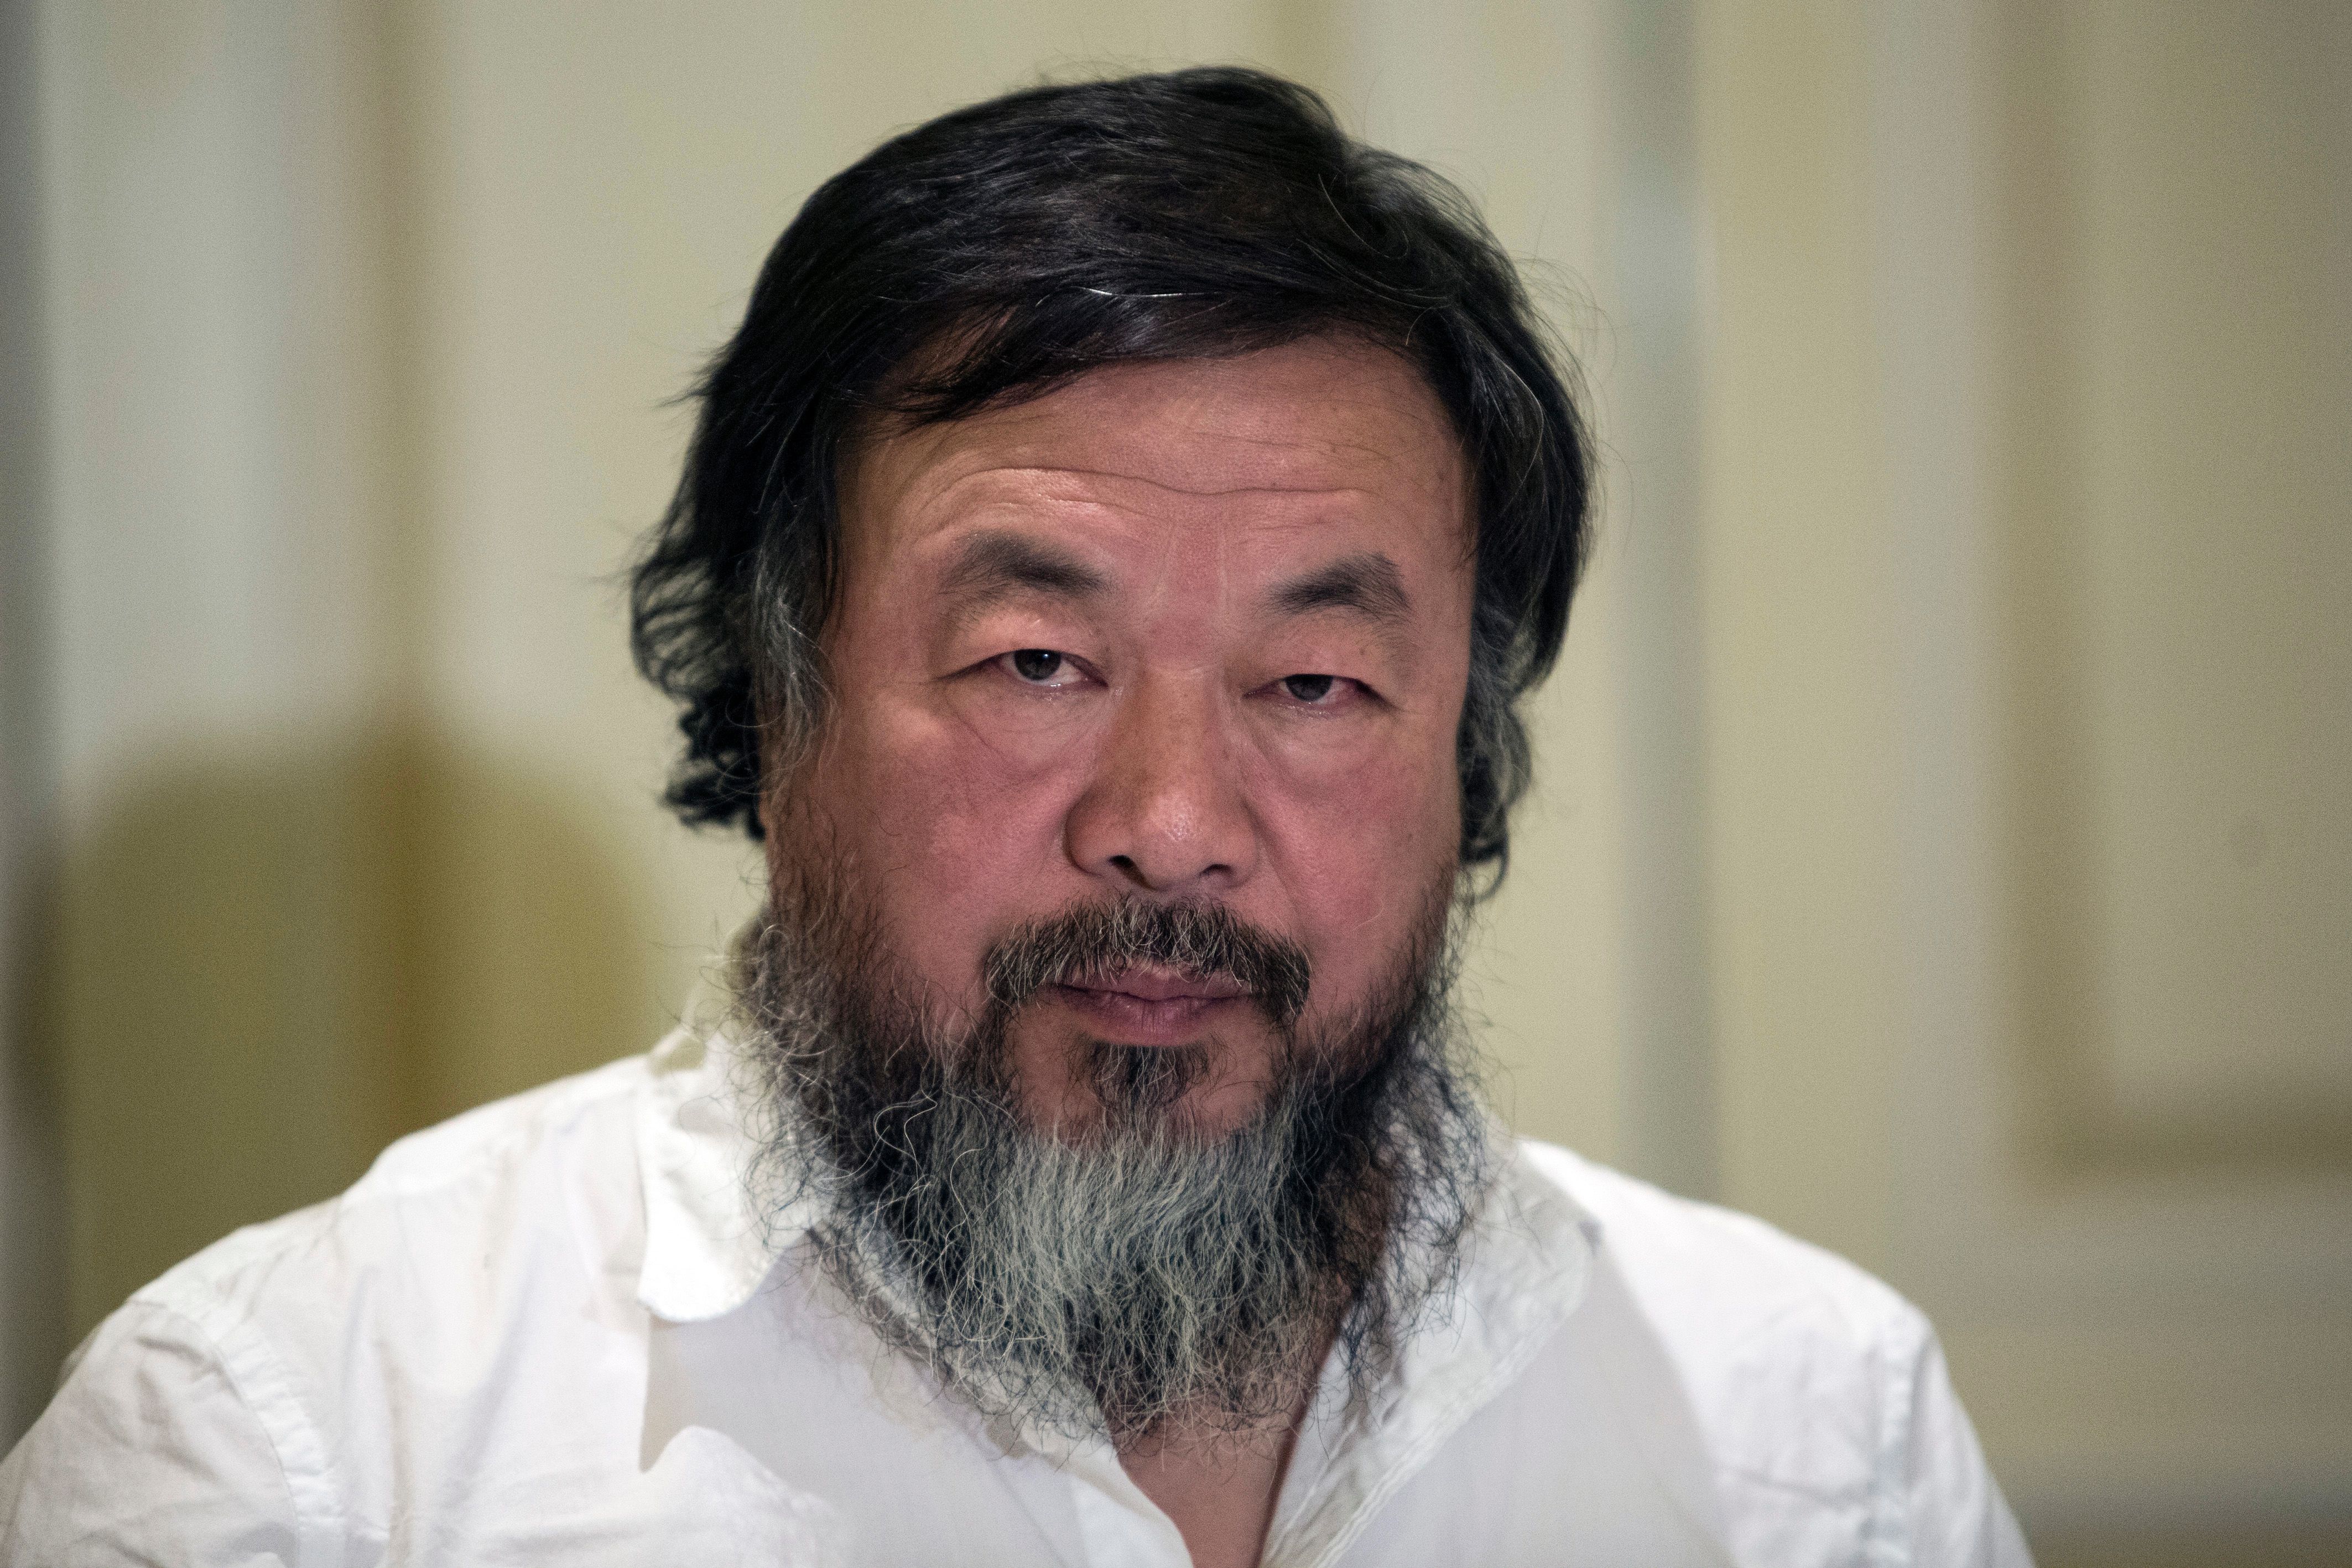 Chinese activist and artist Ai Weiwei is pictured before a press conference in Athens on January 1, 2016. Chinese dissident artist Ai Weiwei paid on December 28, 2015 a holiday visit to refugees and migrants flocking to the Greek island of Lesbos, tweeting out photos and videos in appeals for their plight. / AFP / ANGELOS TZORTZINIS (Photo credit should read ANGELOS TZORTZINIS/AFP/Getty Images)